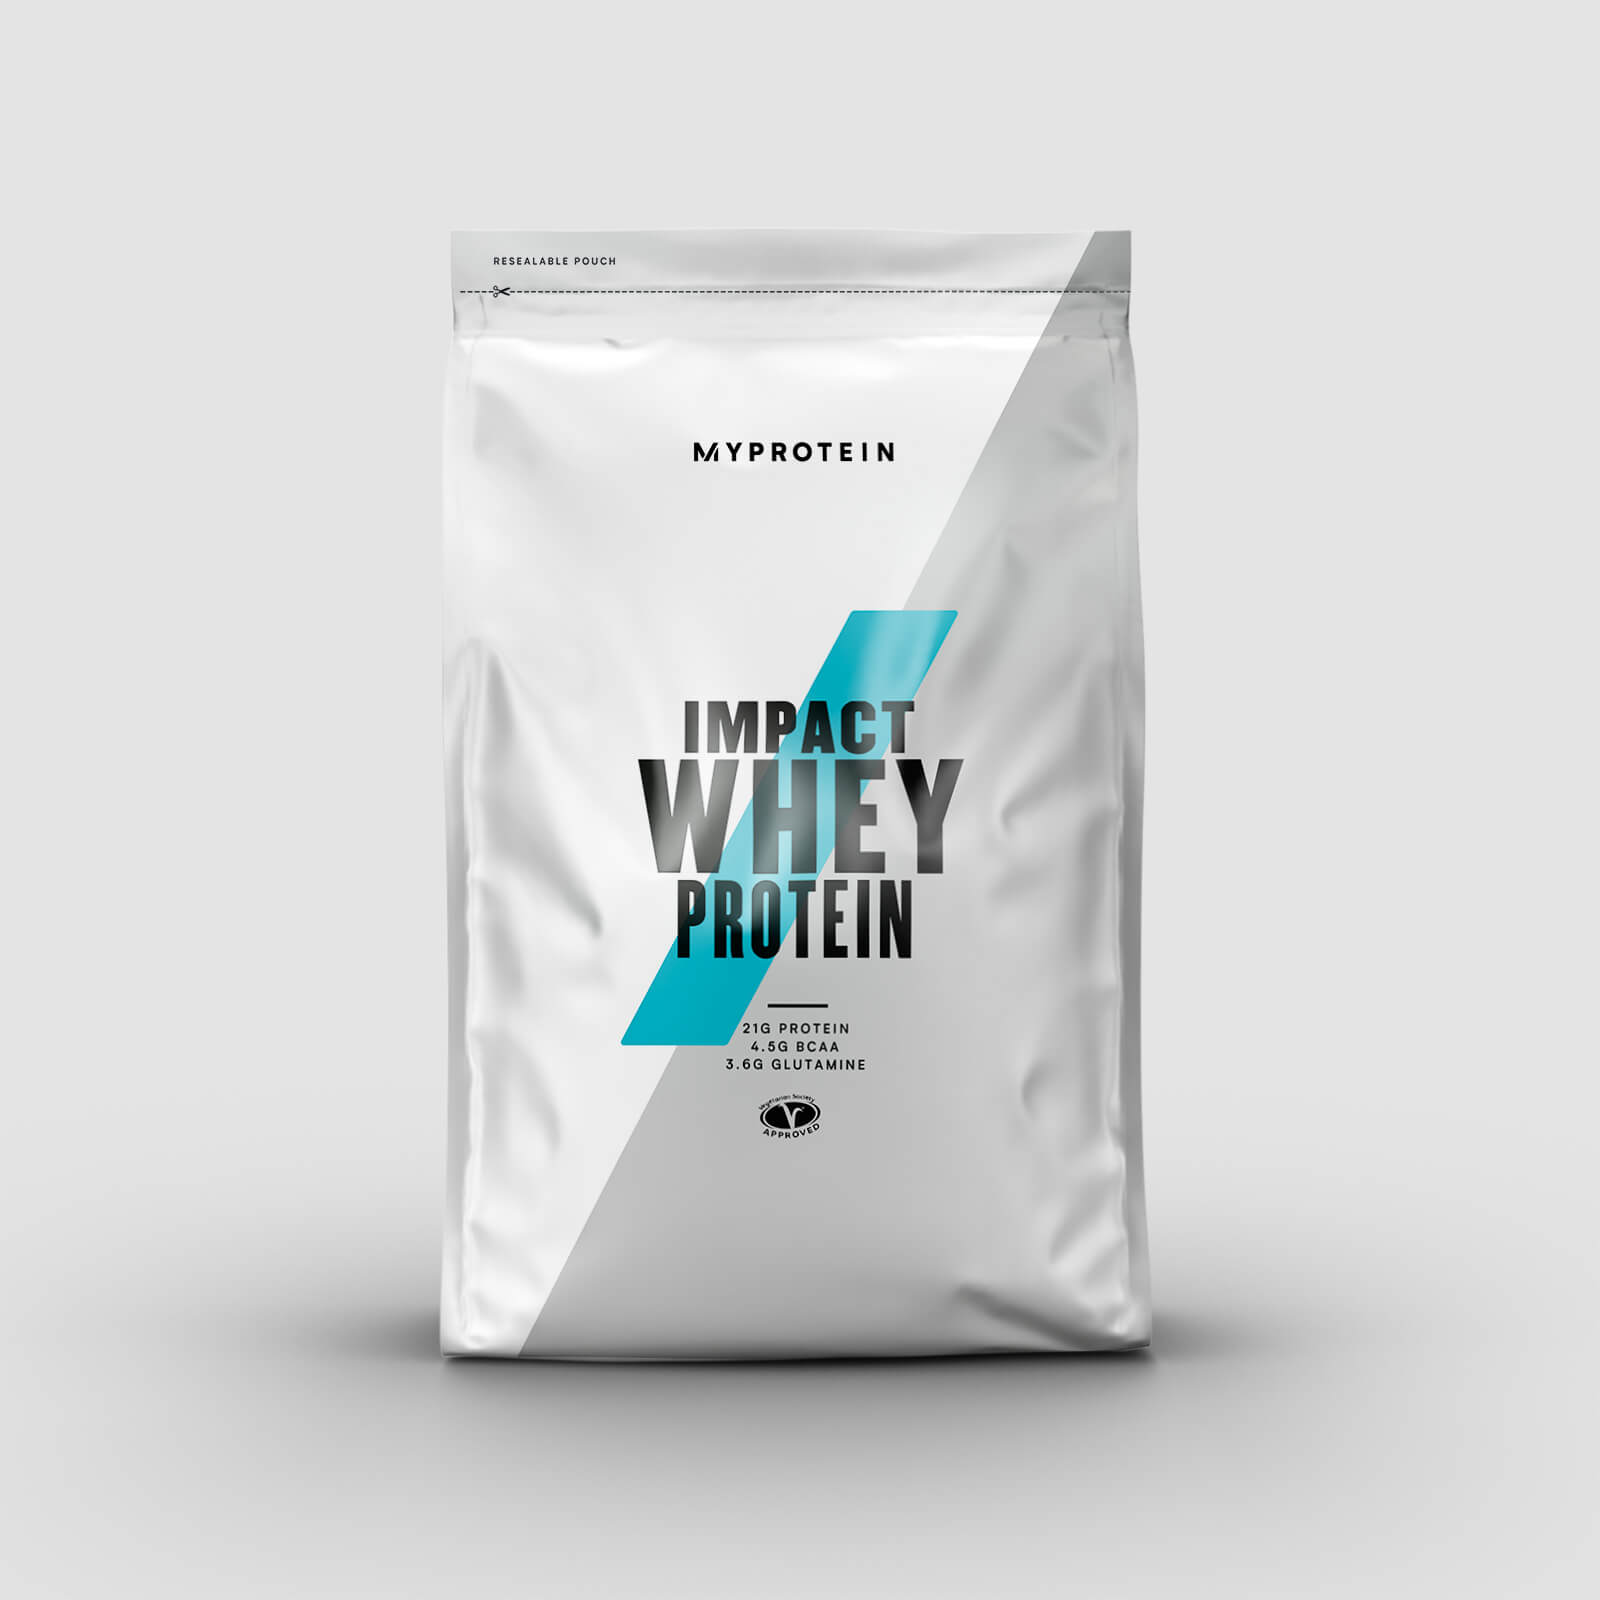 Myprotein Impact Whey Protein - 5kg - Chocolate Brownie - New and Improved